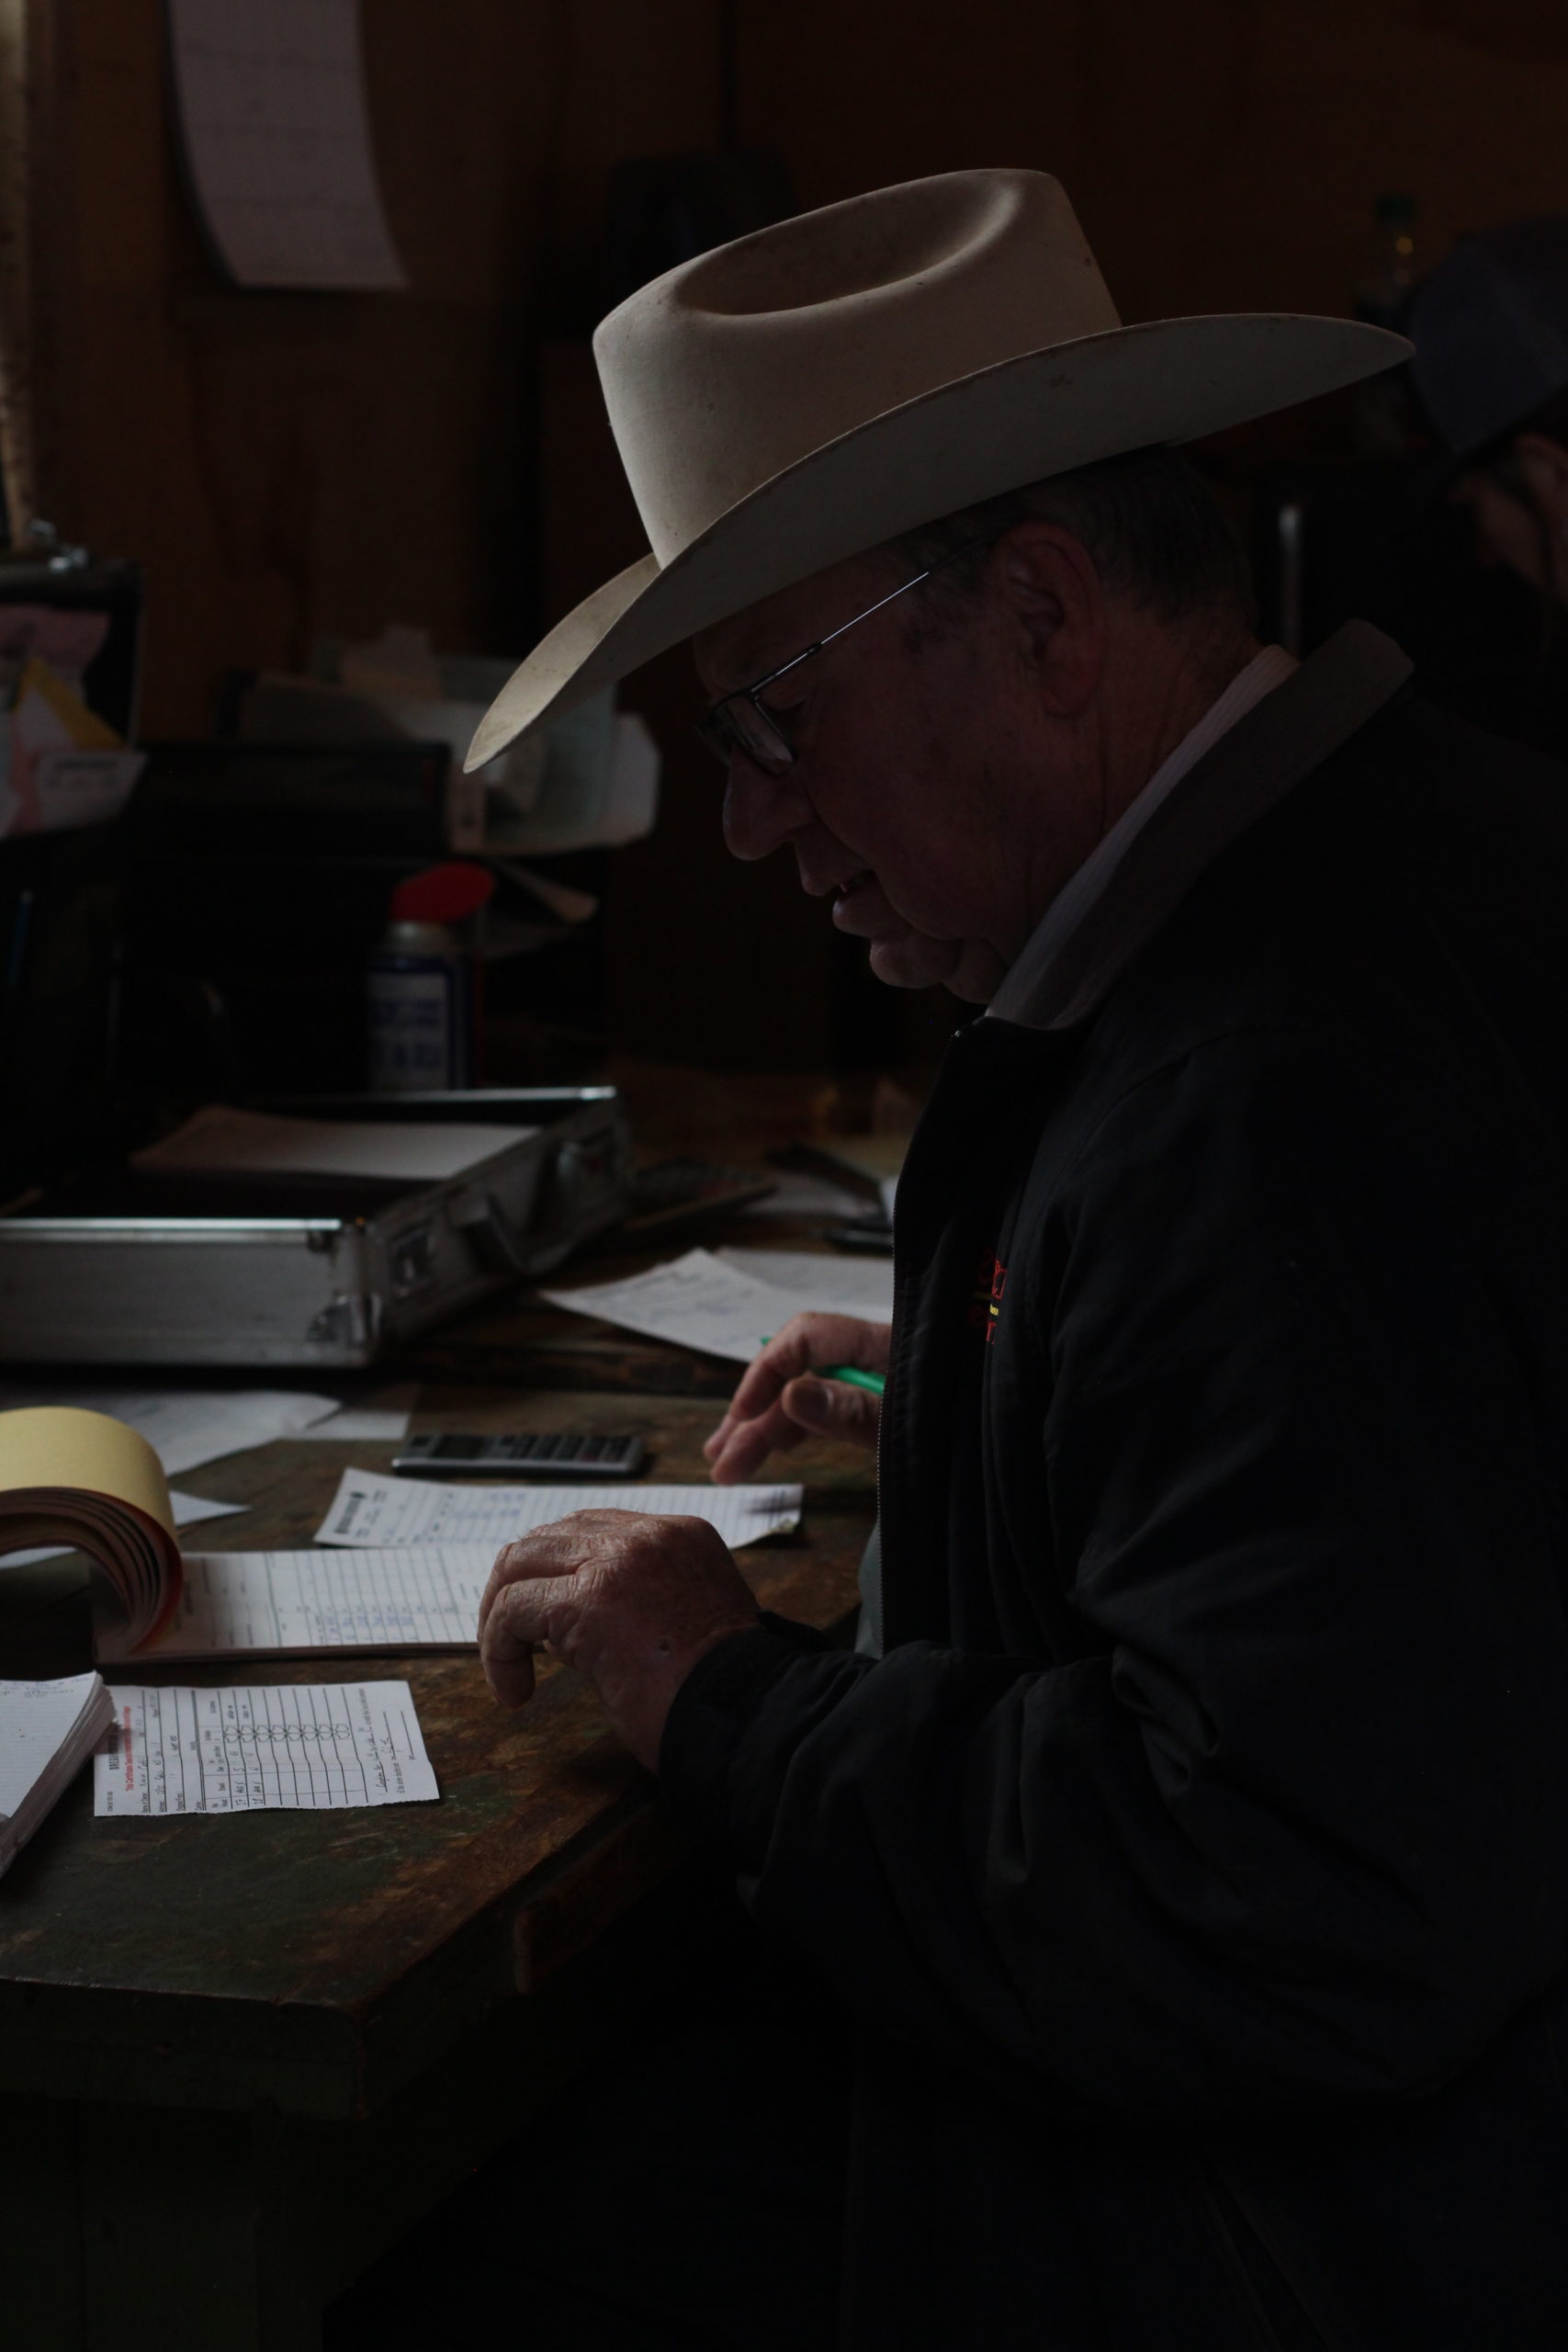 Cattle buyer, Ron Anderson adding up weights and calculating the money he will pay for the calves brought in.